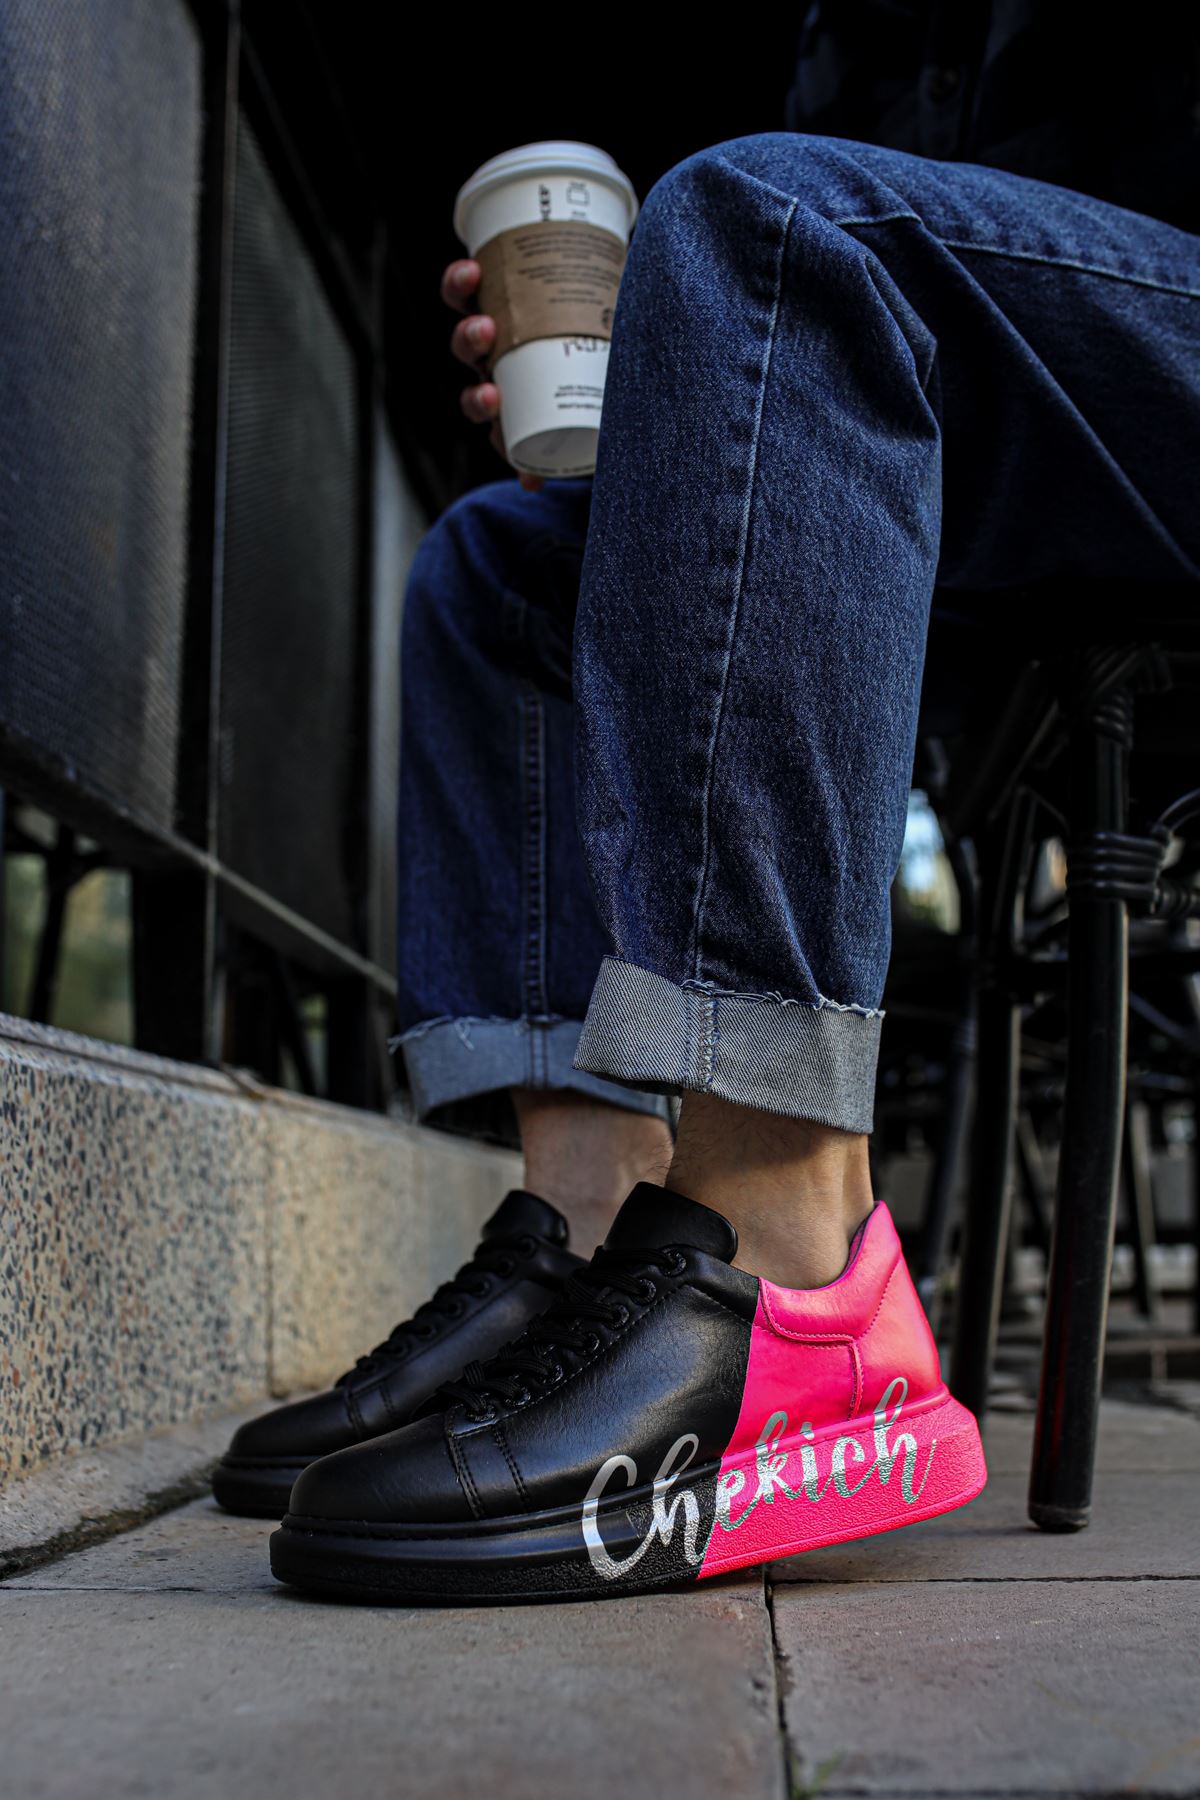 CH254 Men's Unisex Black-Pink Casual Sneaker Sports Shoes - STREETMODE™